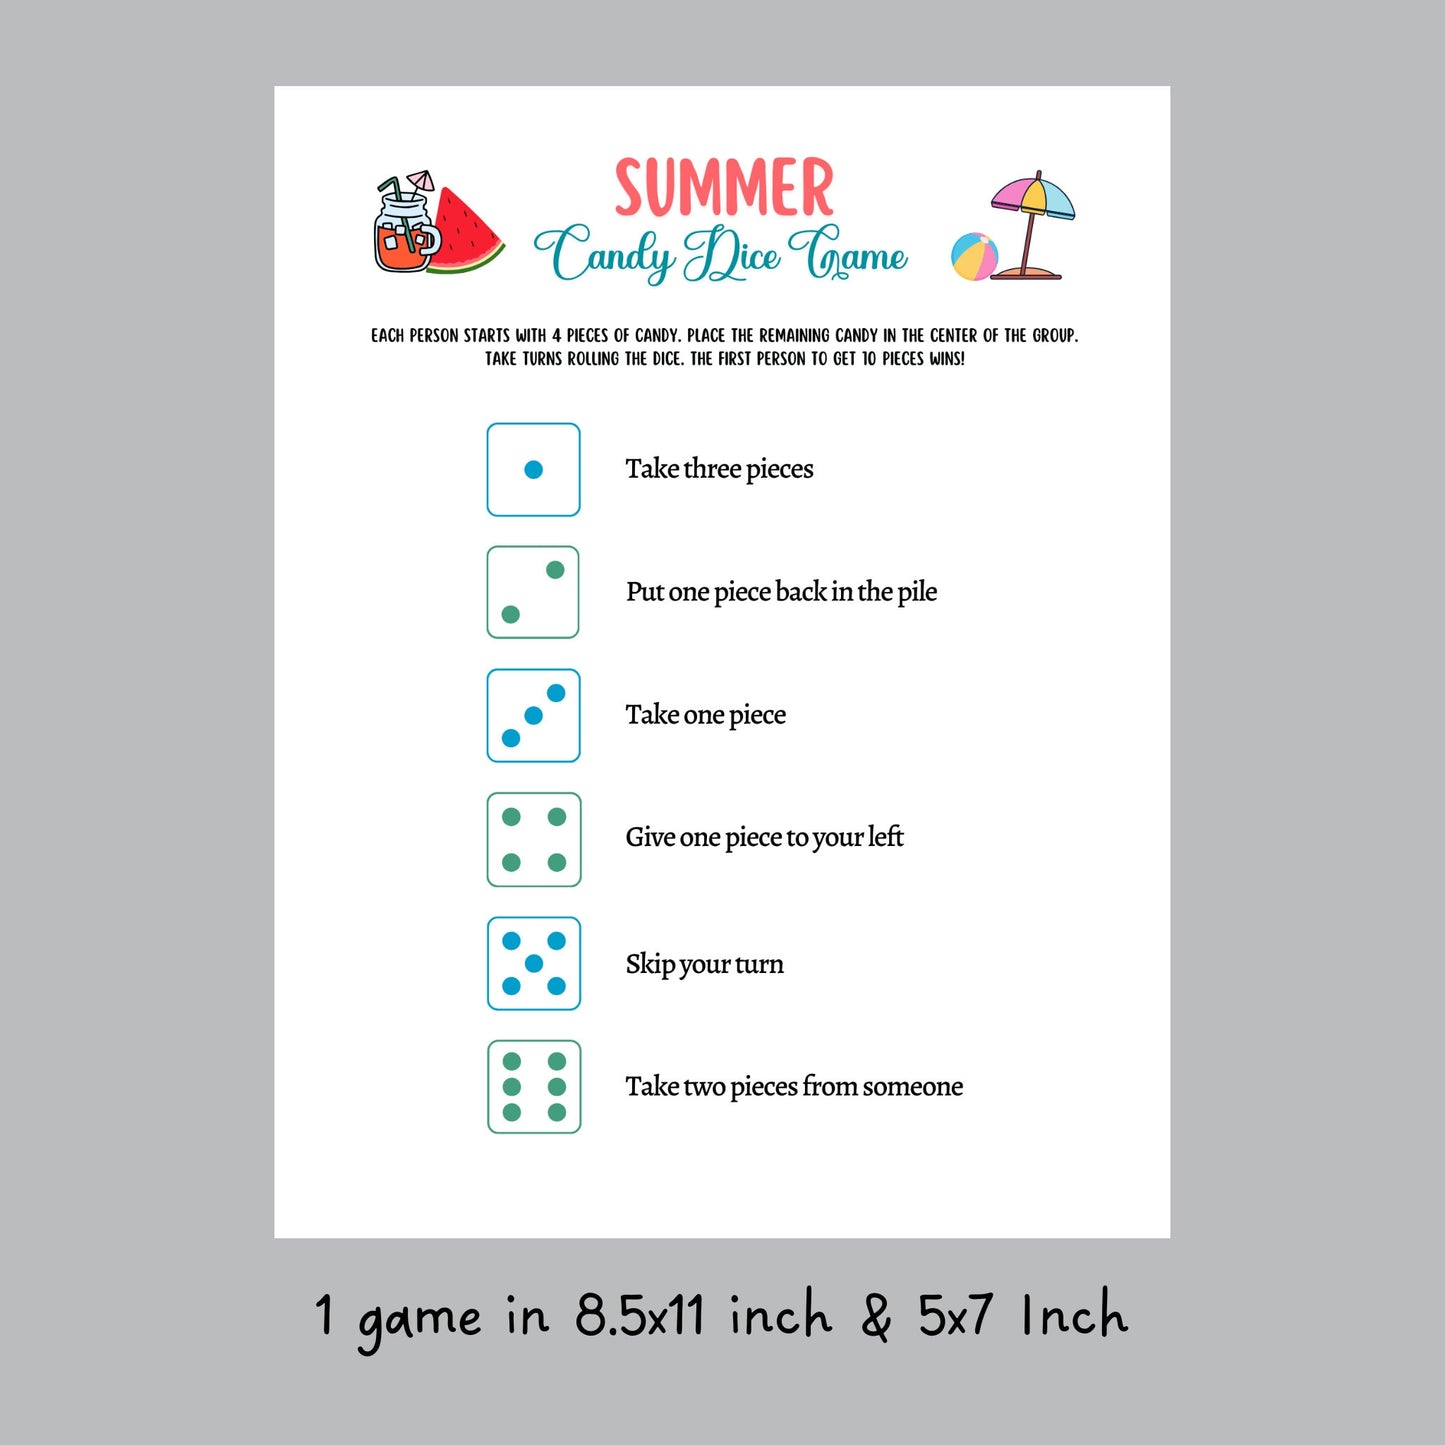 Summer Candy Dice Game Printable, Pool Party Games, Summer Camp Activity, Fun Beach Games Kids, Summer Break Vacation Idea, Road Trip Game